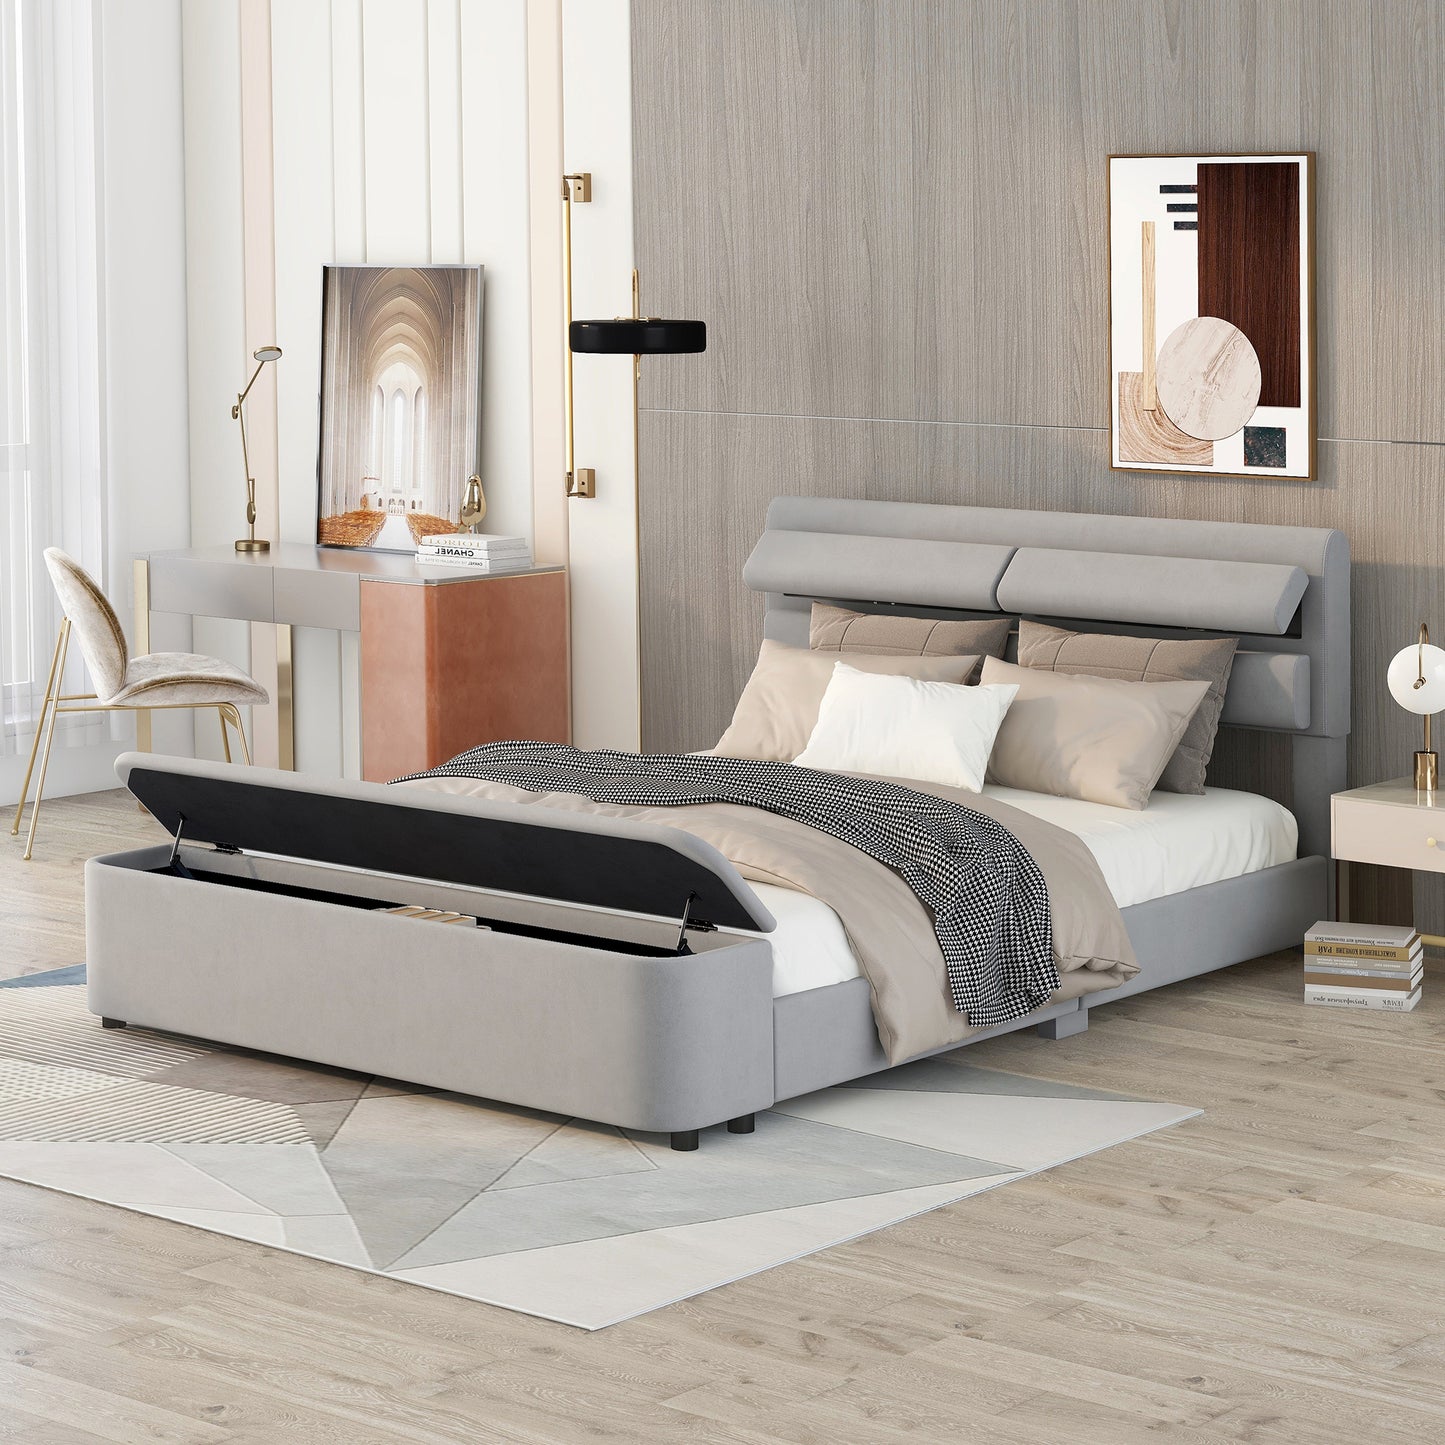 Queen Size Upholstery Platform Bed with Storage Headboard and Footboard,Support Legs,Grey